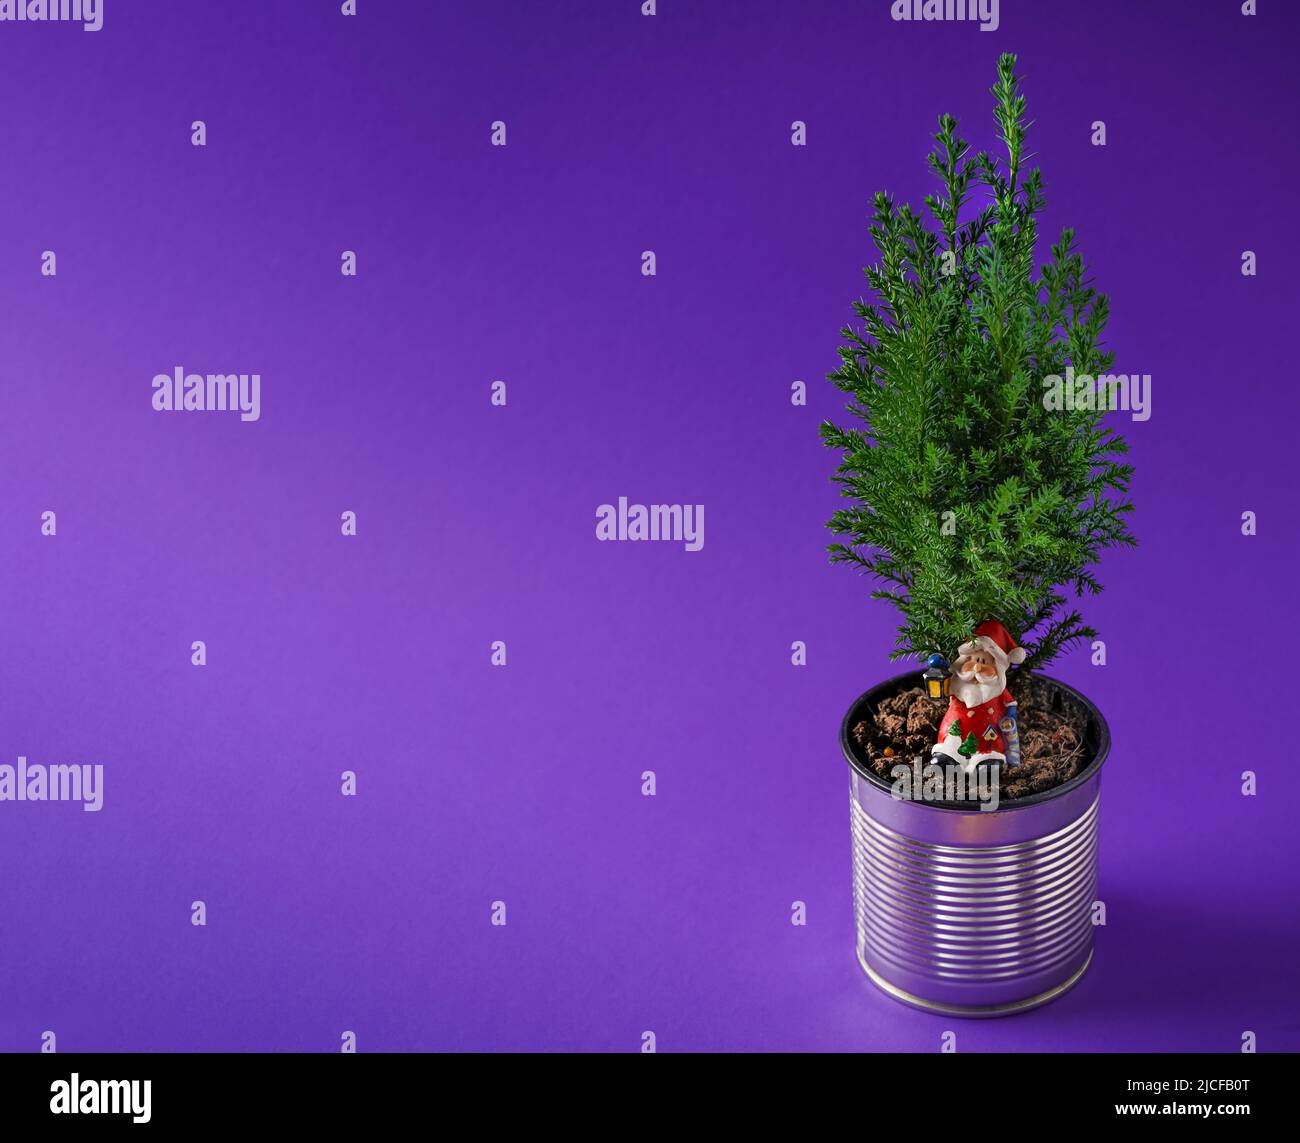 The cypress is green. Coniferous house plant. Christmas tree in a pot. Tin can like a flowerpot. Use of recyclable materials. Violet very peri background with place for text. Toy Santa Claus. Stock Photo